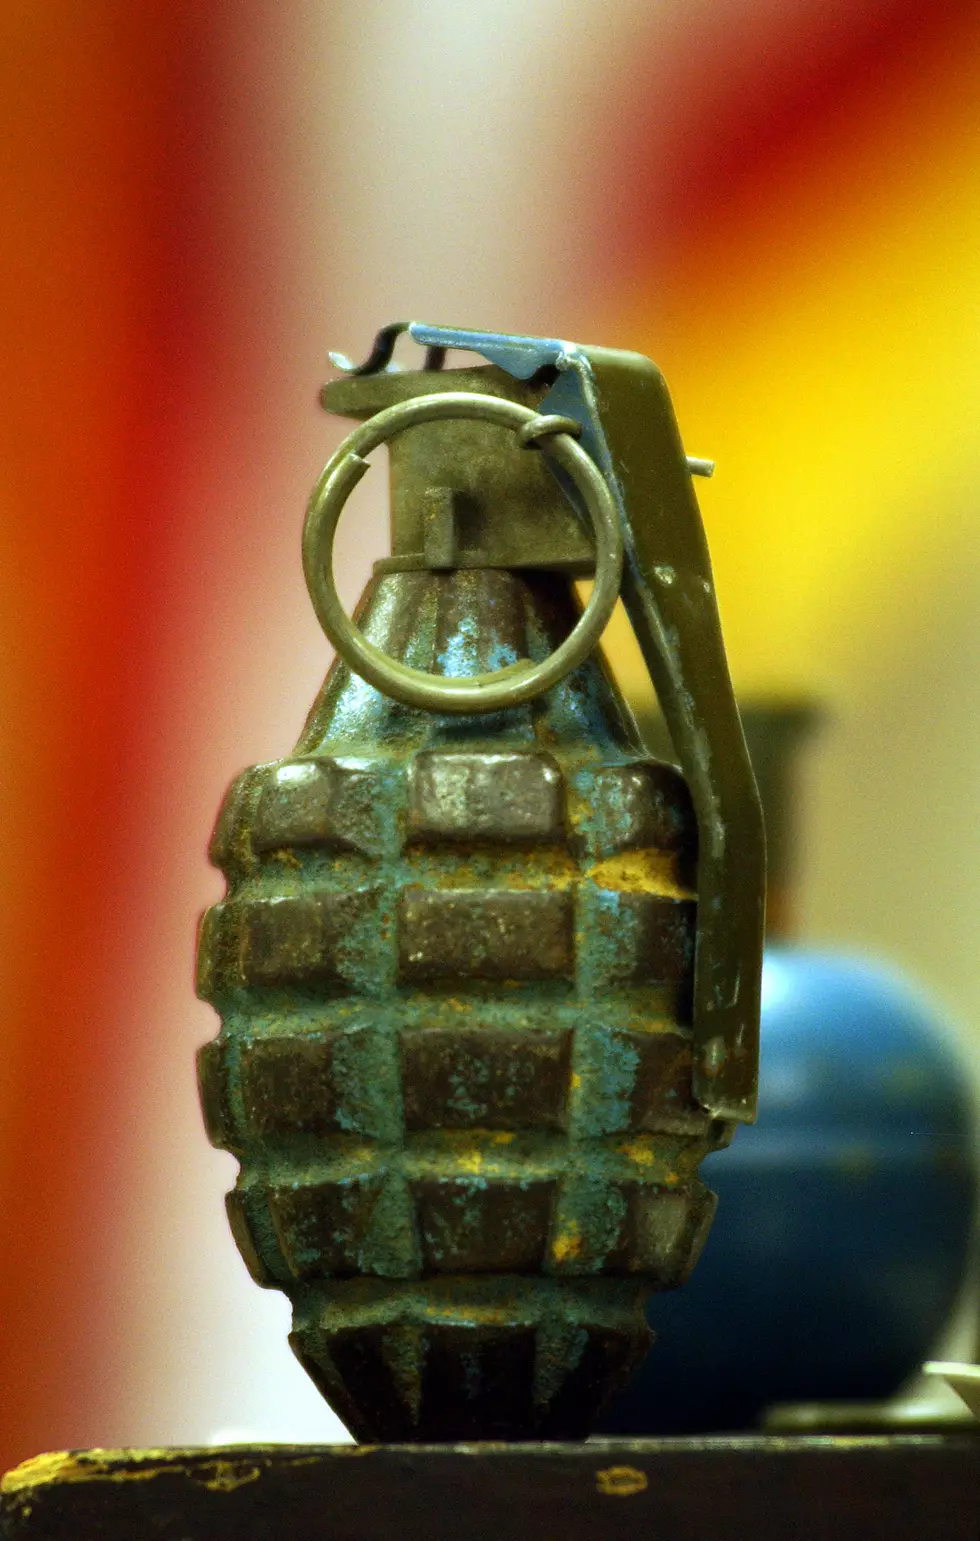 Couple Finds Grenades in Wyoming, MI: Drives Them To Police